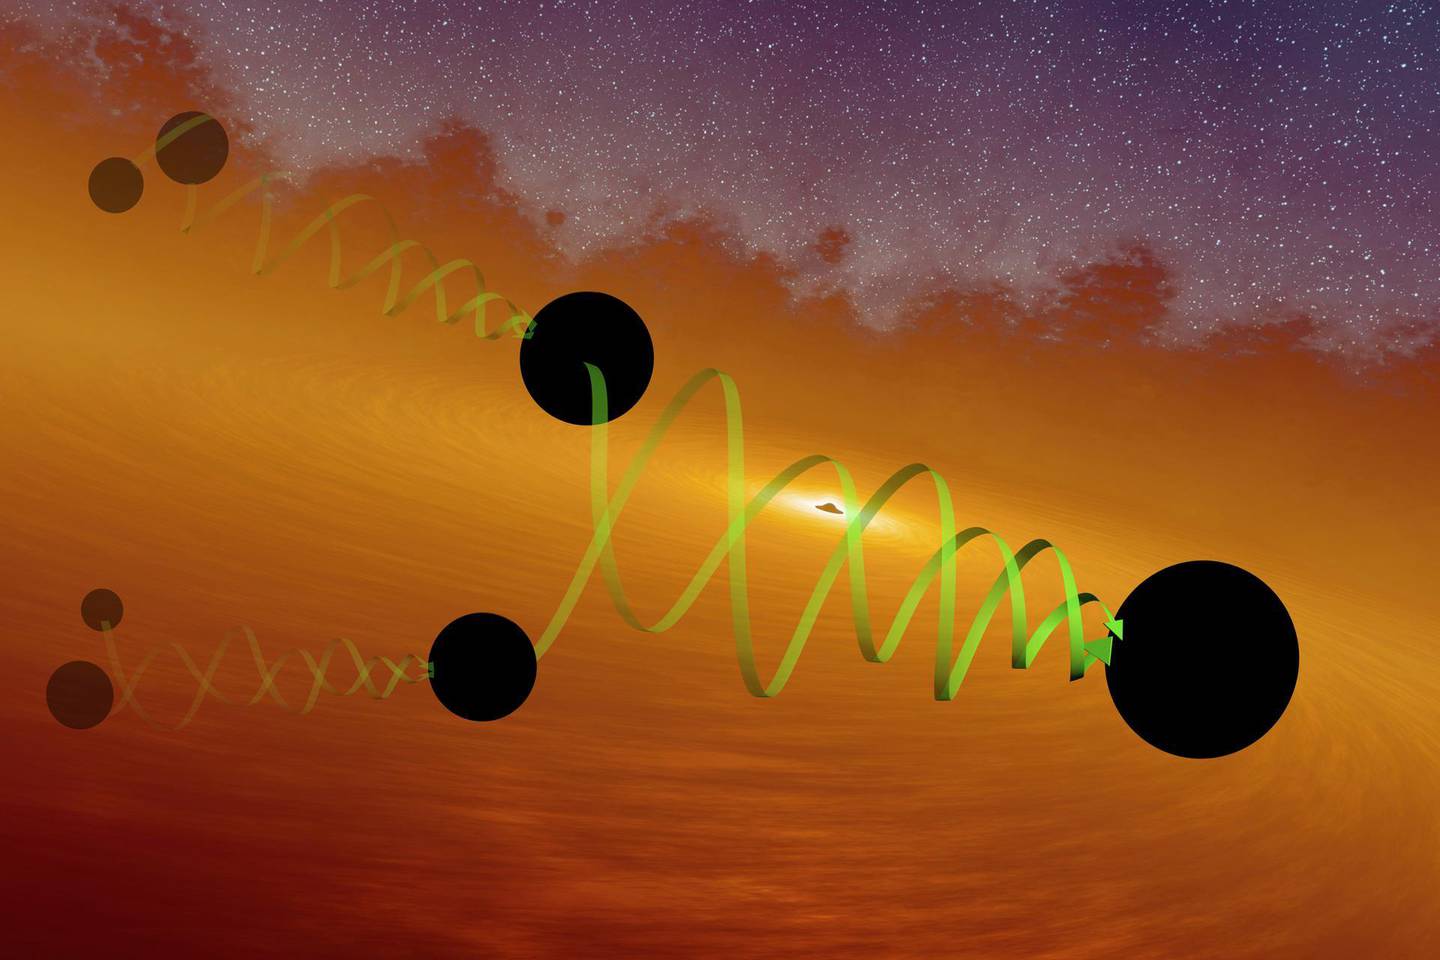 This illustration provided by LIGO/Caltech in September 2020 depicts two black holes of about 66 and 85 solar masses spiralling into each other to form the GW190521 black hole. Gravitational waves from the merger were detected by the LIGO and Virgo observatories in May 2019. (LIGO/Caltech/MIT/R. Hurt (IPAC) via AP)